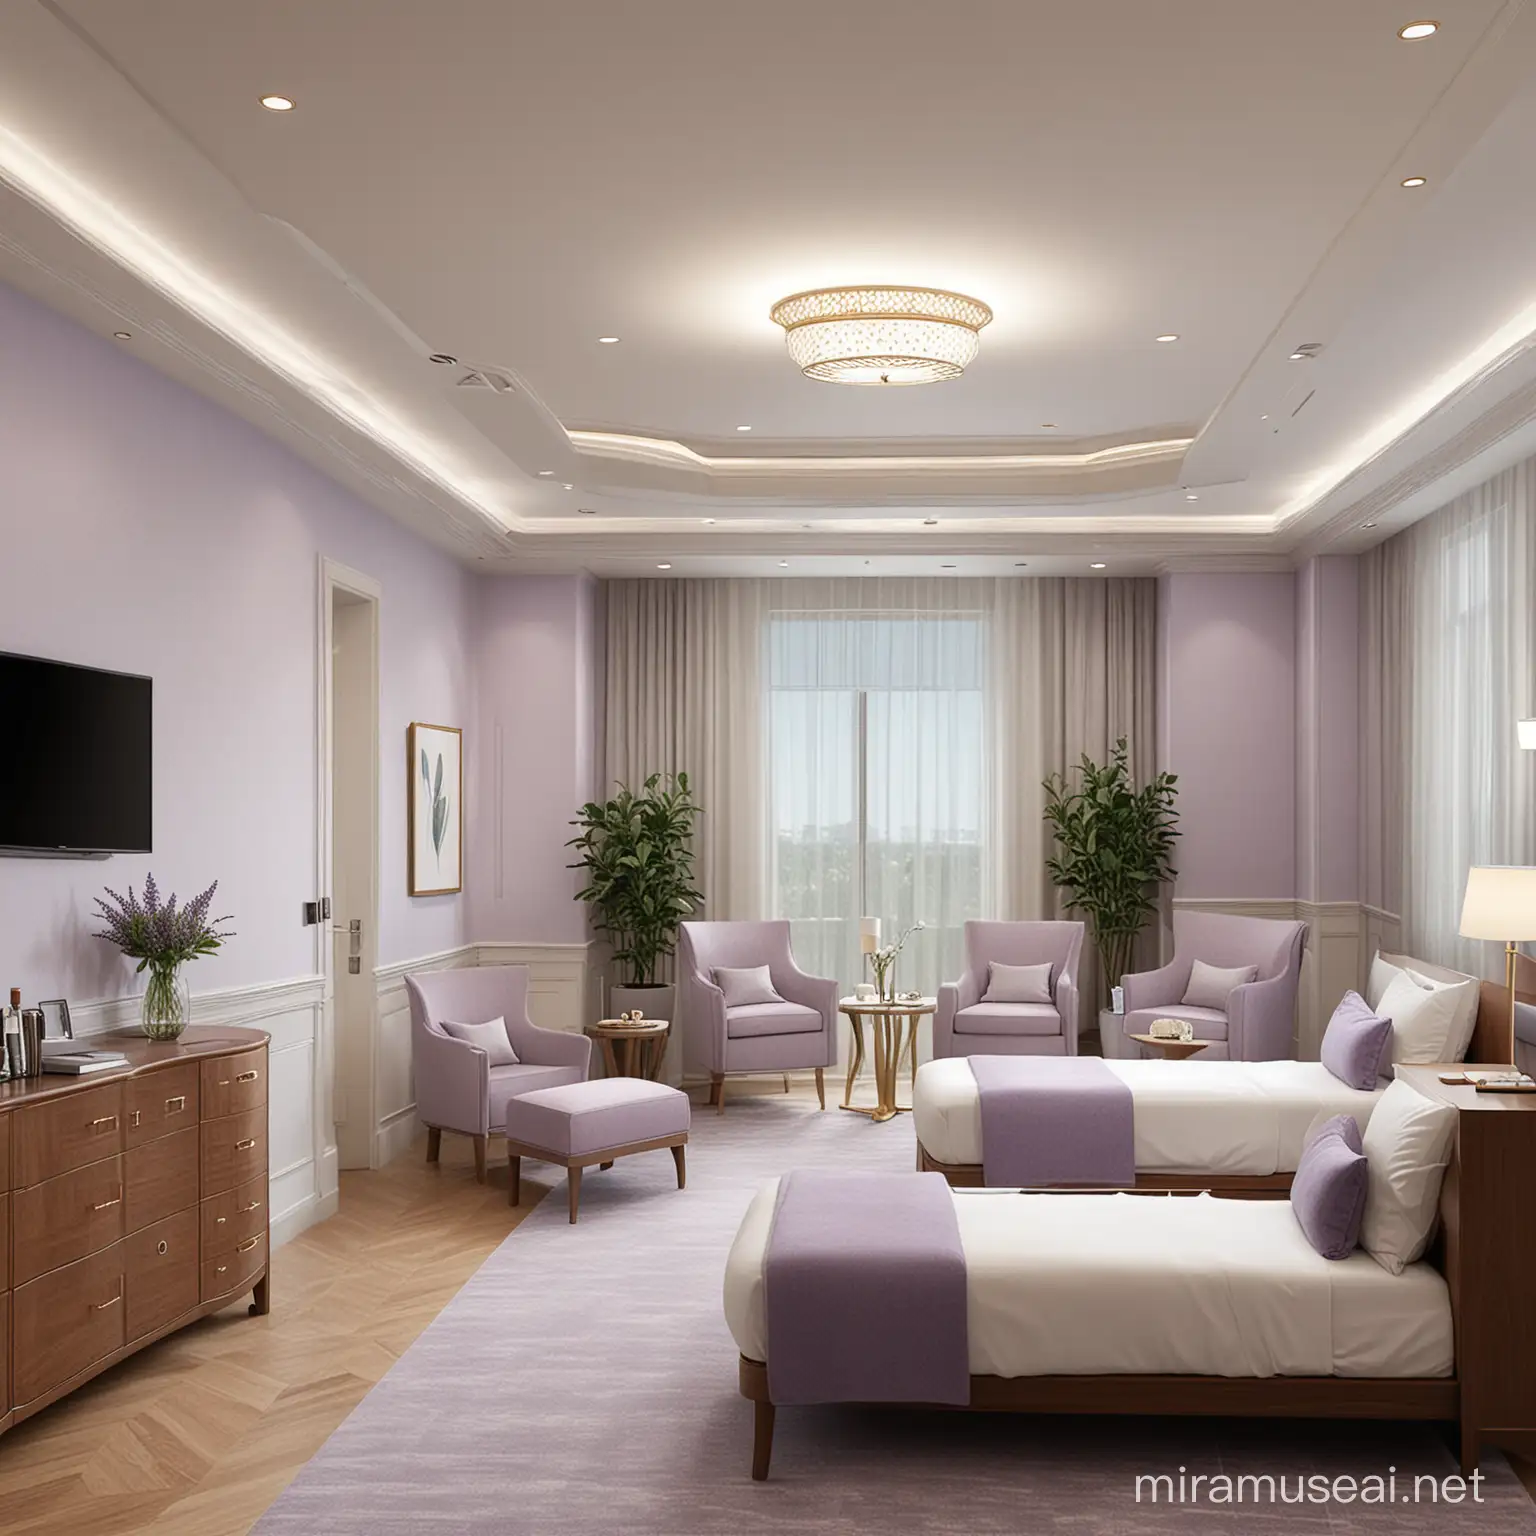 Luxurious Lavender and Eucalyptus Inspired Presidential Suite in Respiratory Hospital Ward